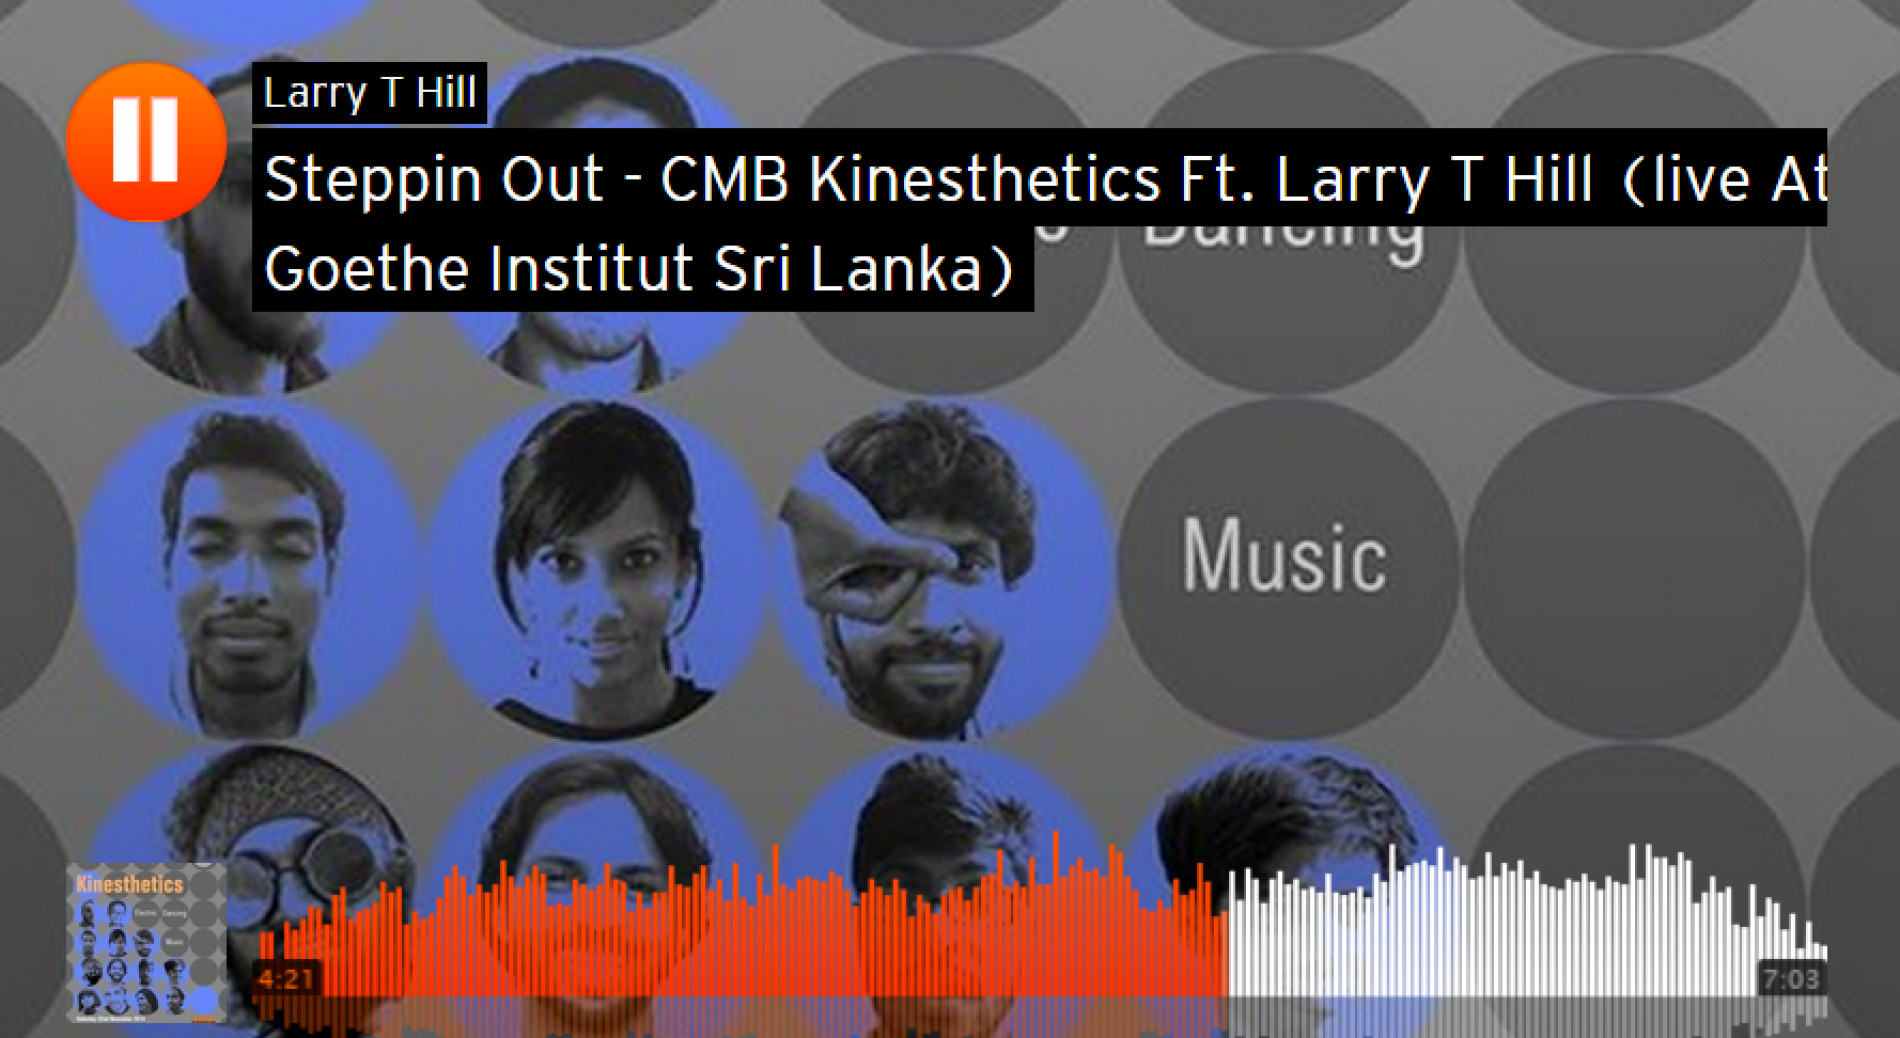 CMB Kinesthetics Ft. Larry T Hill: Steppin Out